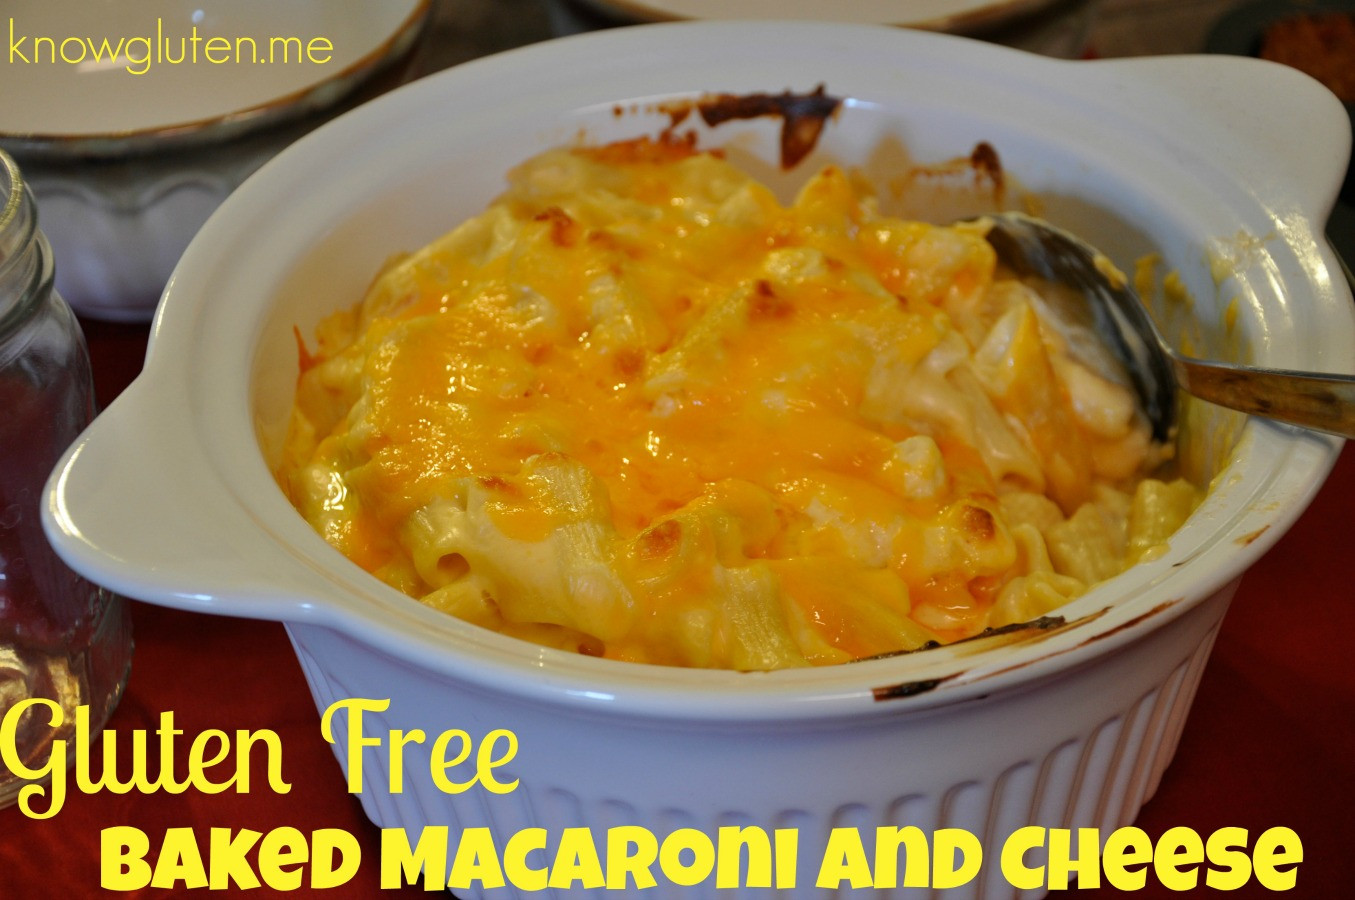 Gluten Free Baked Macaroni And Cheese
 Easy Gluten Free Baked Macaroni and Cheese know gluten